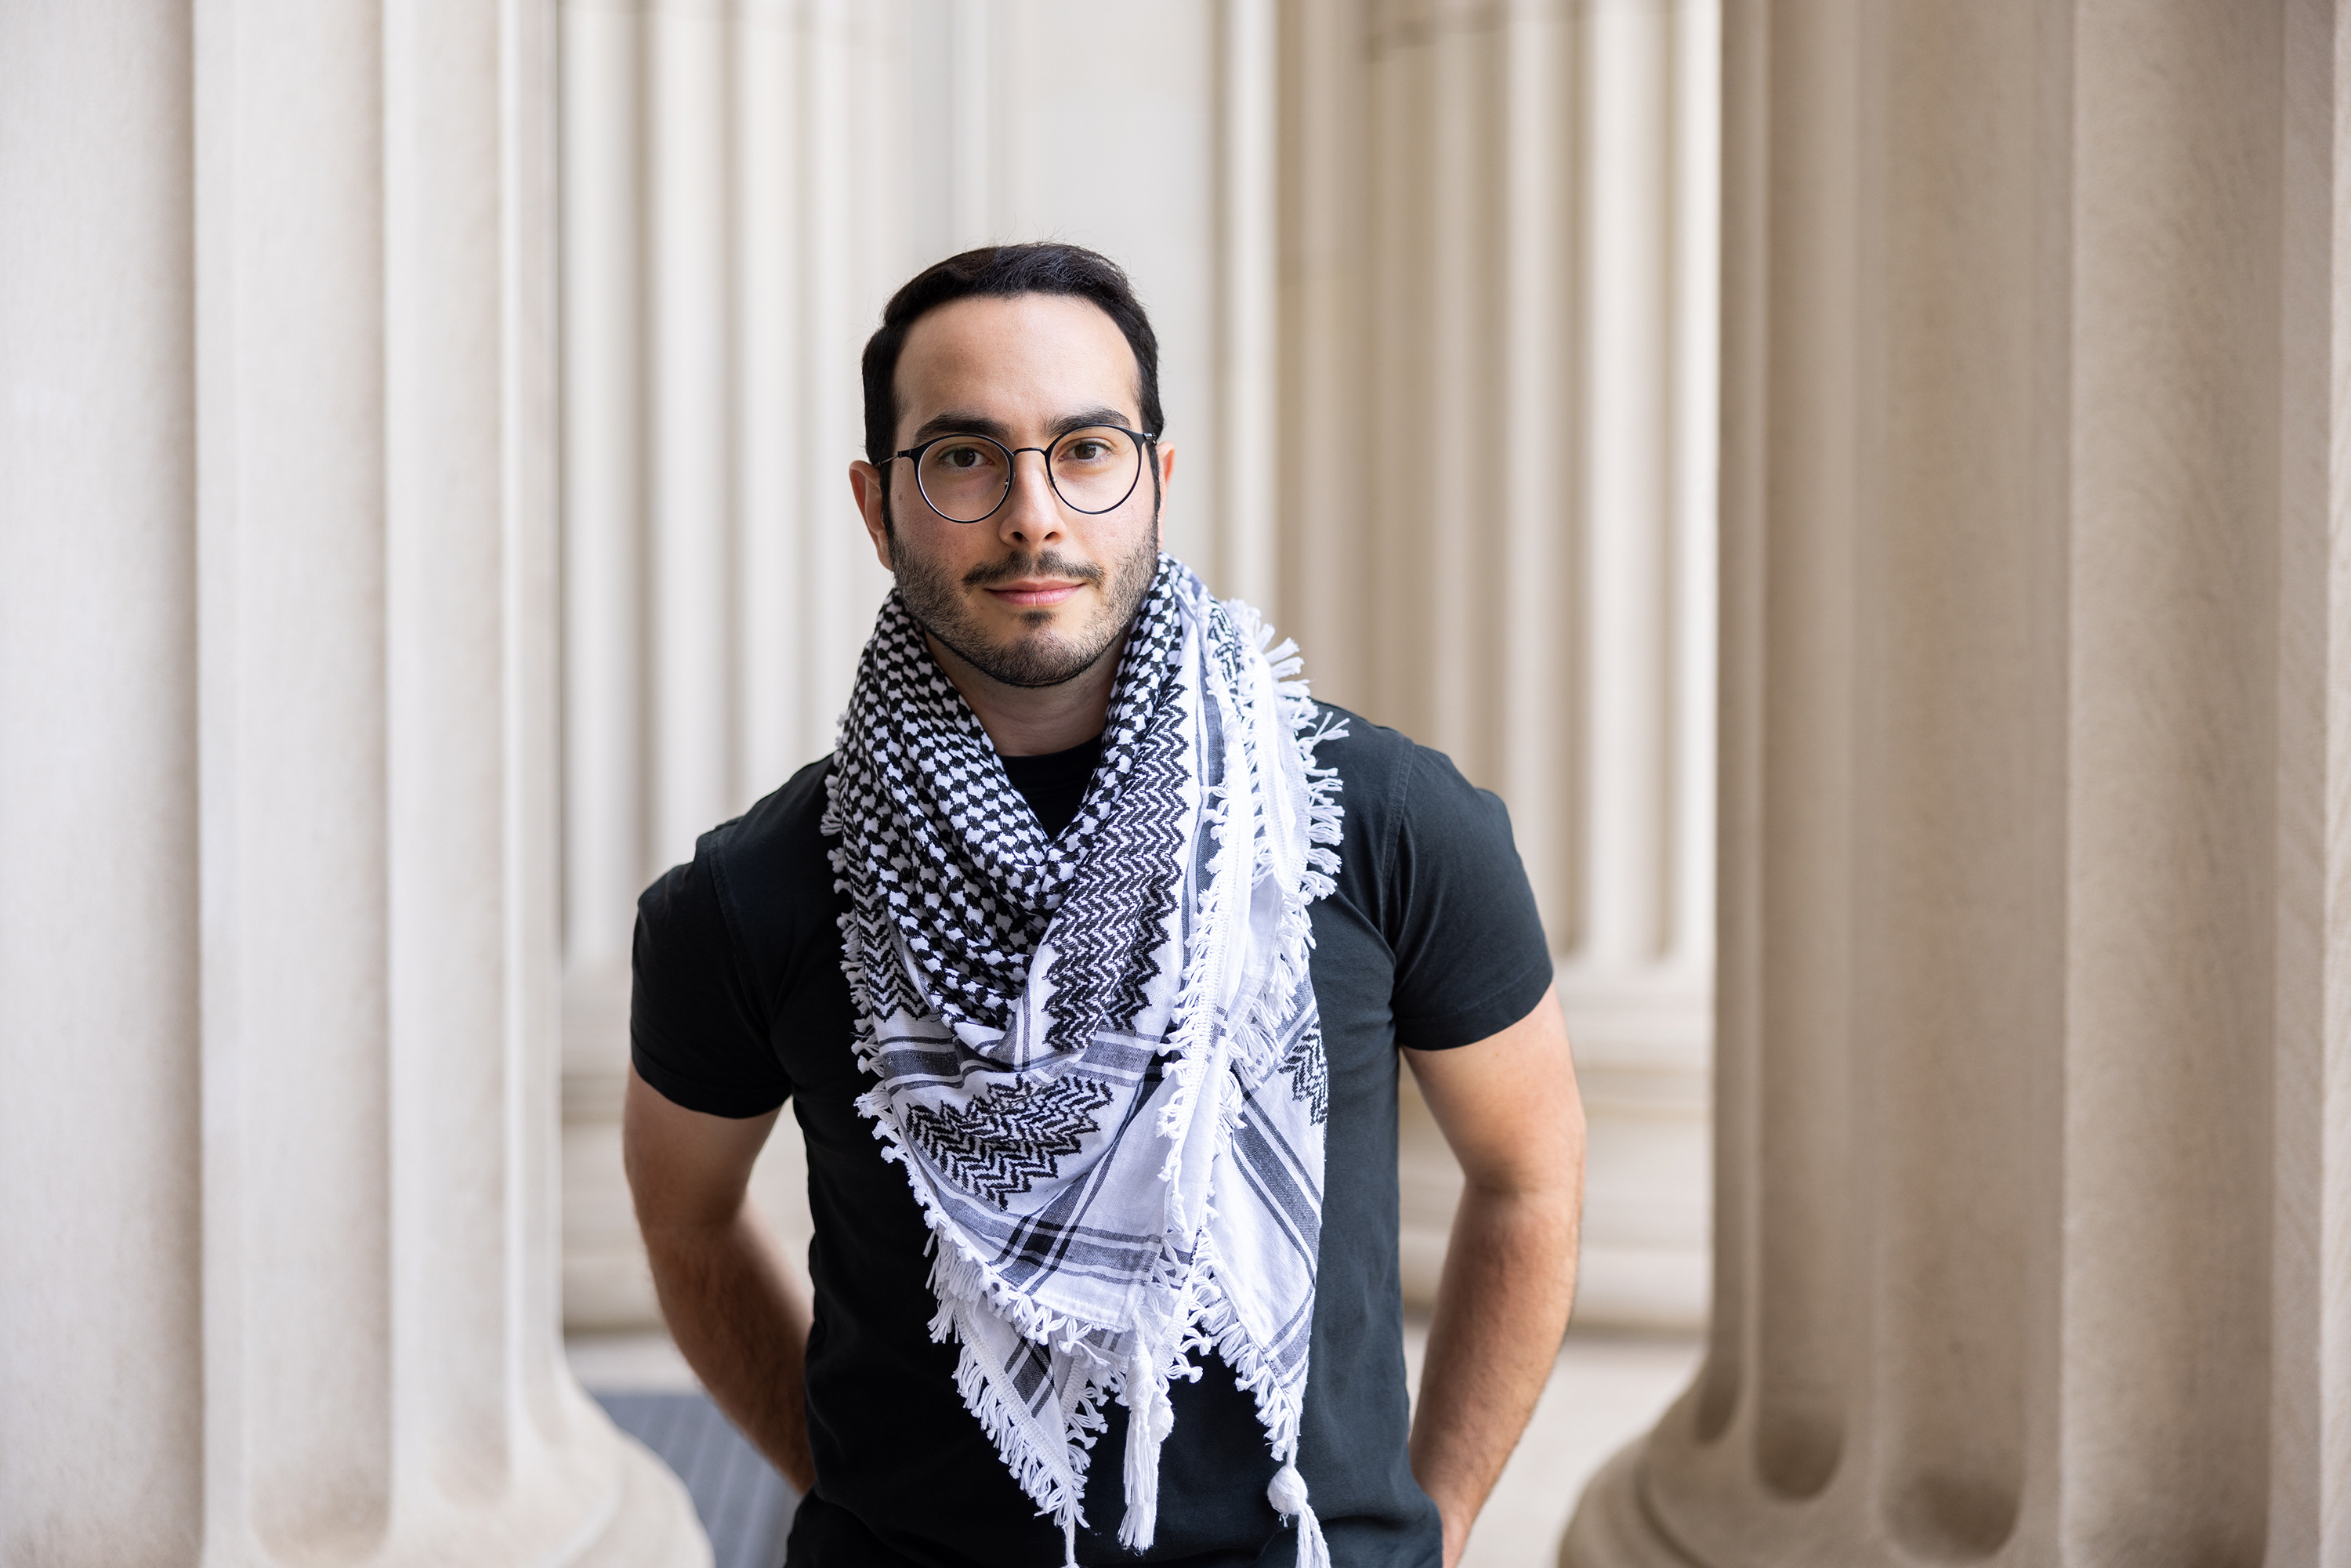 One scientist's journey from the Middle East to MIT | MIT News |  Massachusetts Institute of Technology